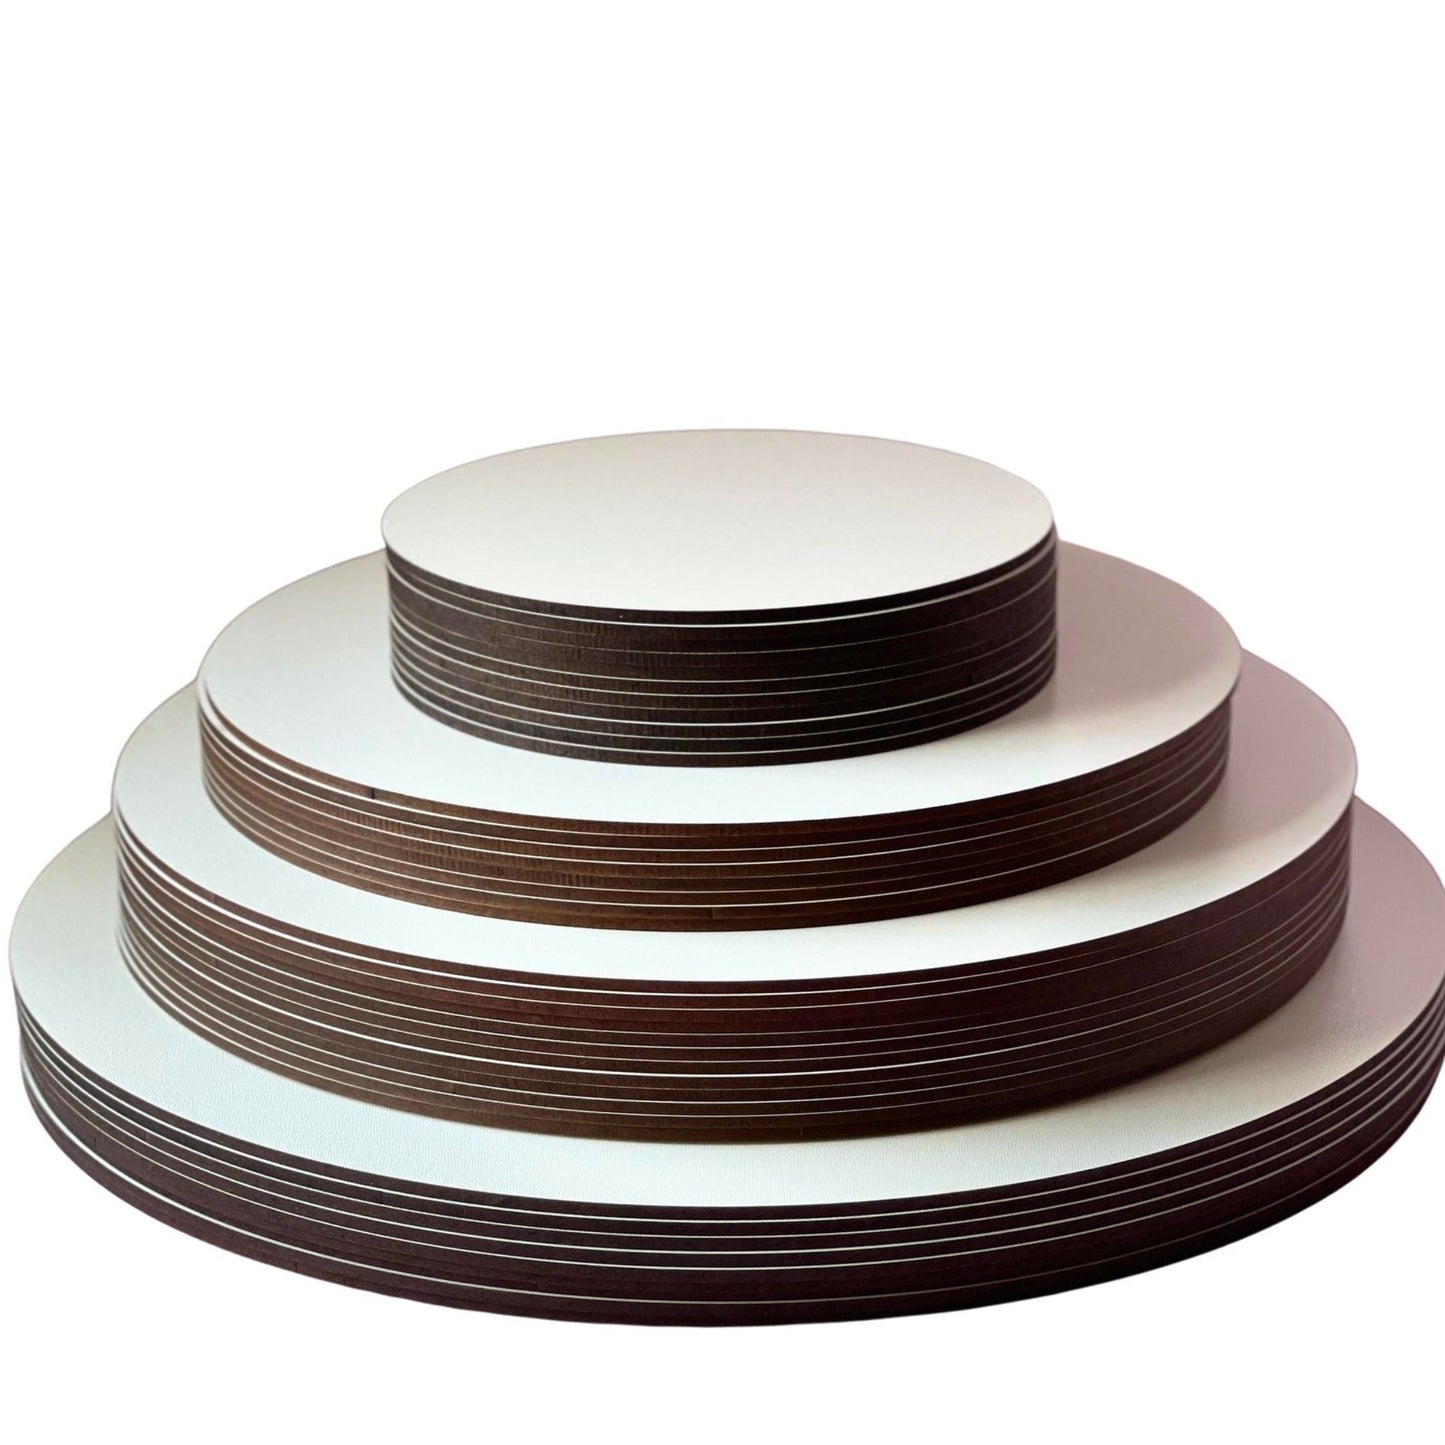 PLAIN Wooden Cake Boards for Cakes, ⌀ 35, 1 pcs